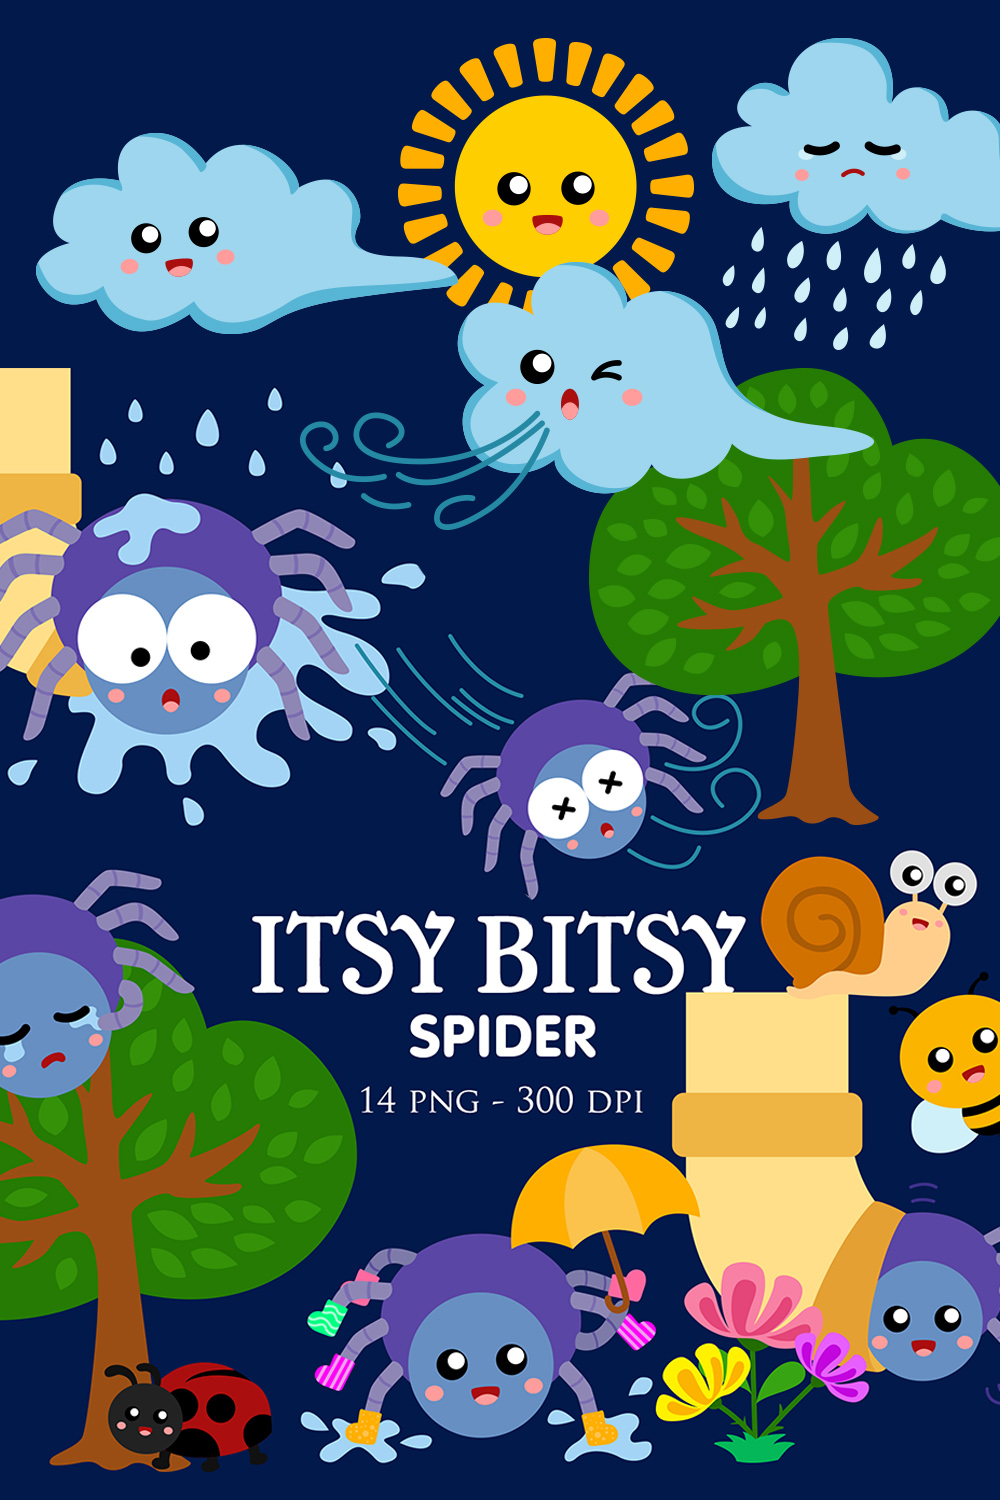 Itsy Bitsy Spider Classing Song Rhymes Kids Bedtime Story Vector Clipart Illustrations pinterest preview image.